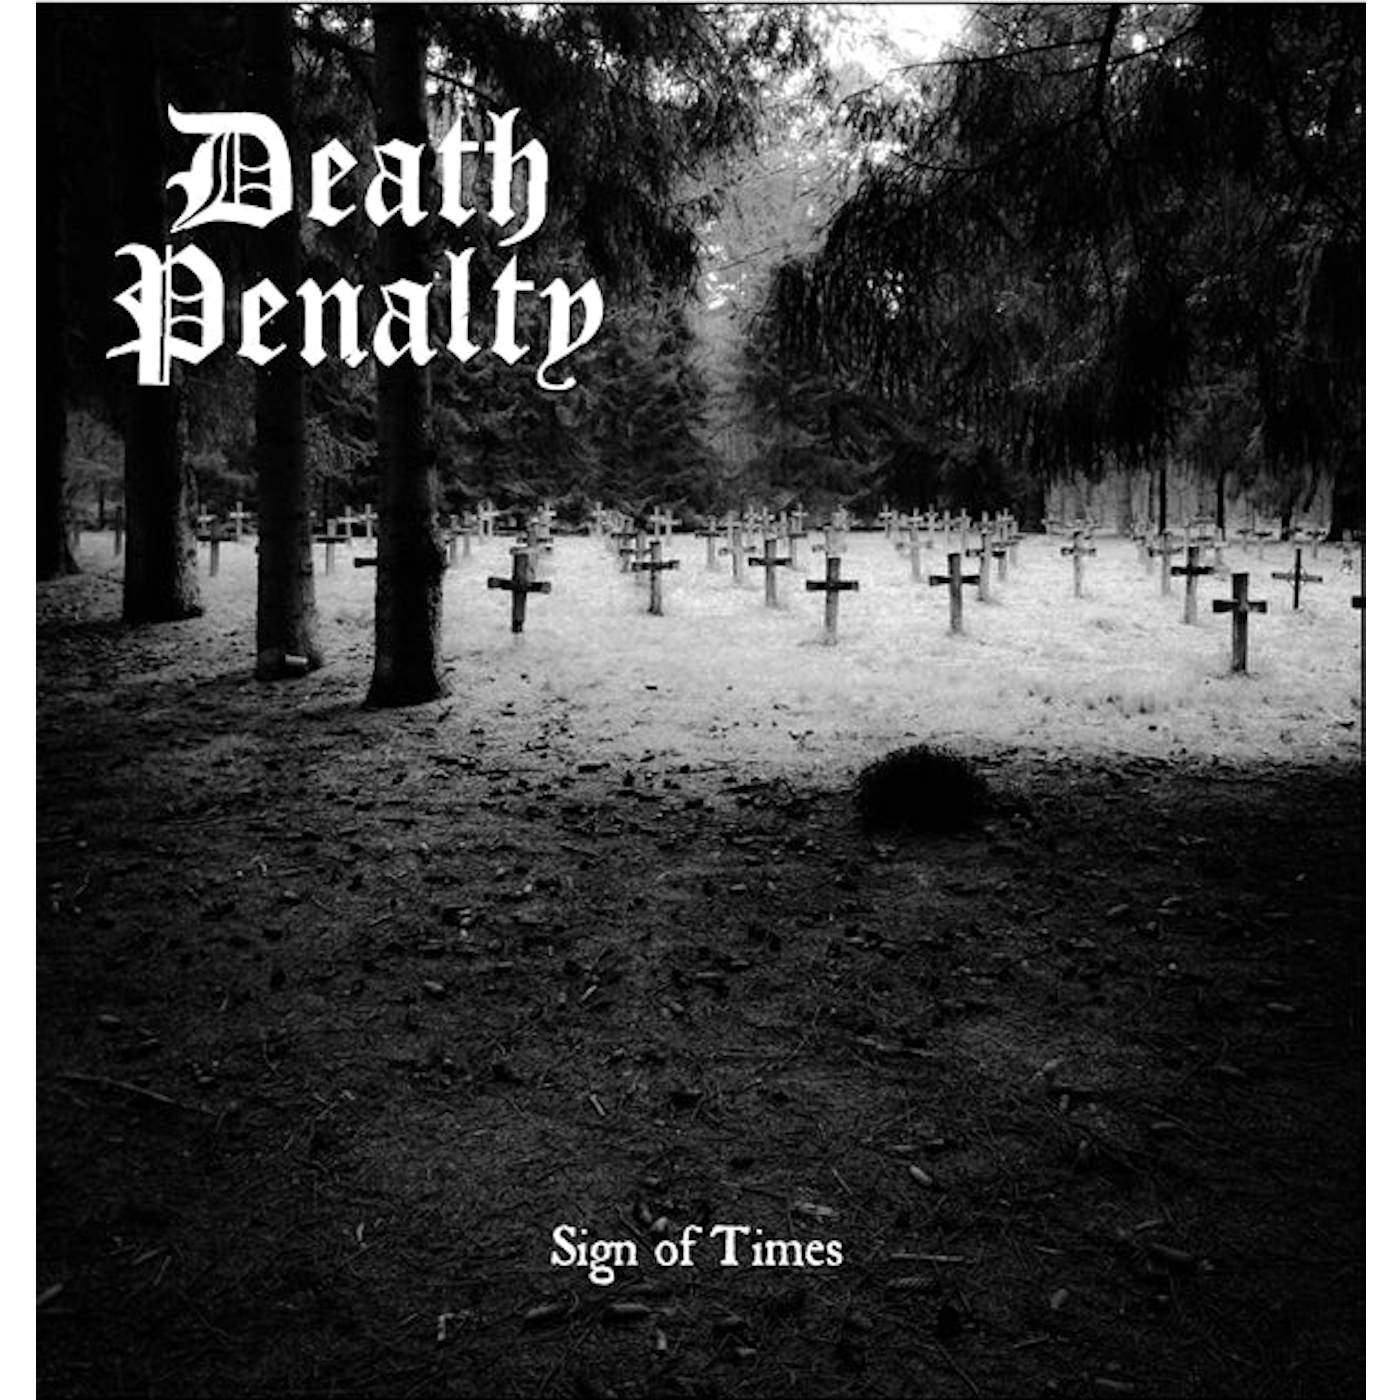 Death Penalty LP - Sign Of Times (Vinyl)